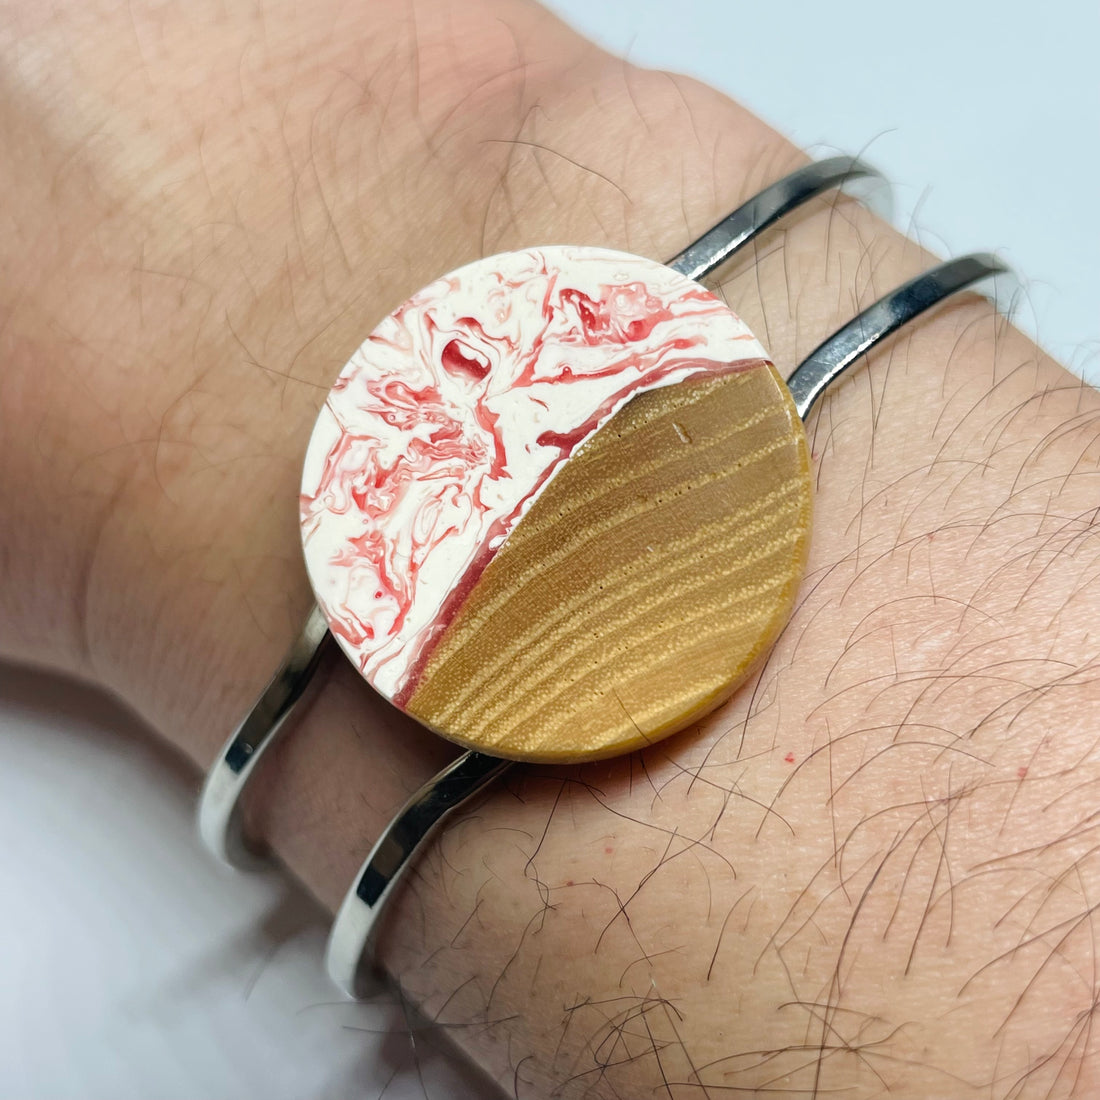 handmade jewelry, Minnesota local wood and resin artist. Red and white resin with birch wood, platinum plated bracelet